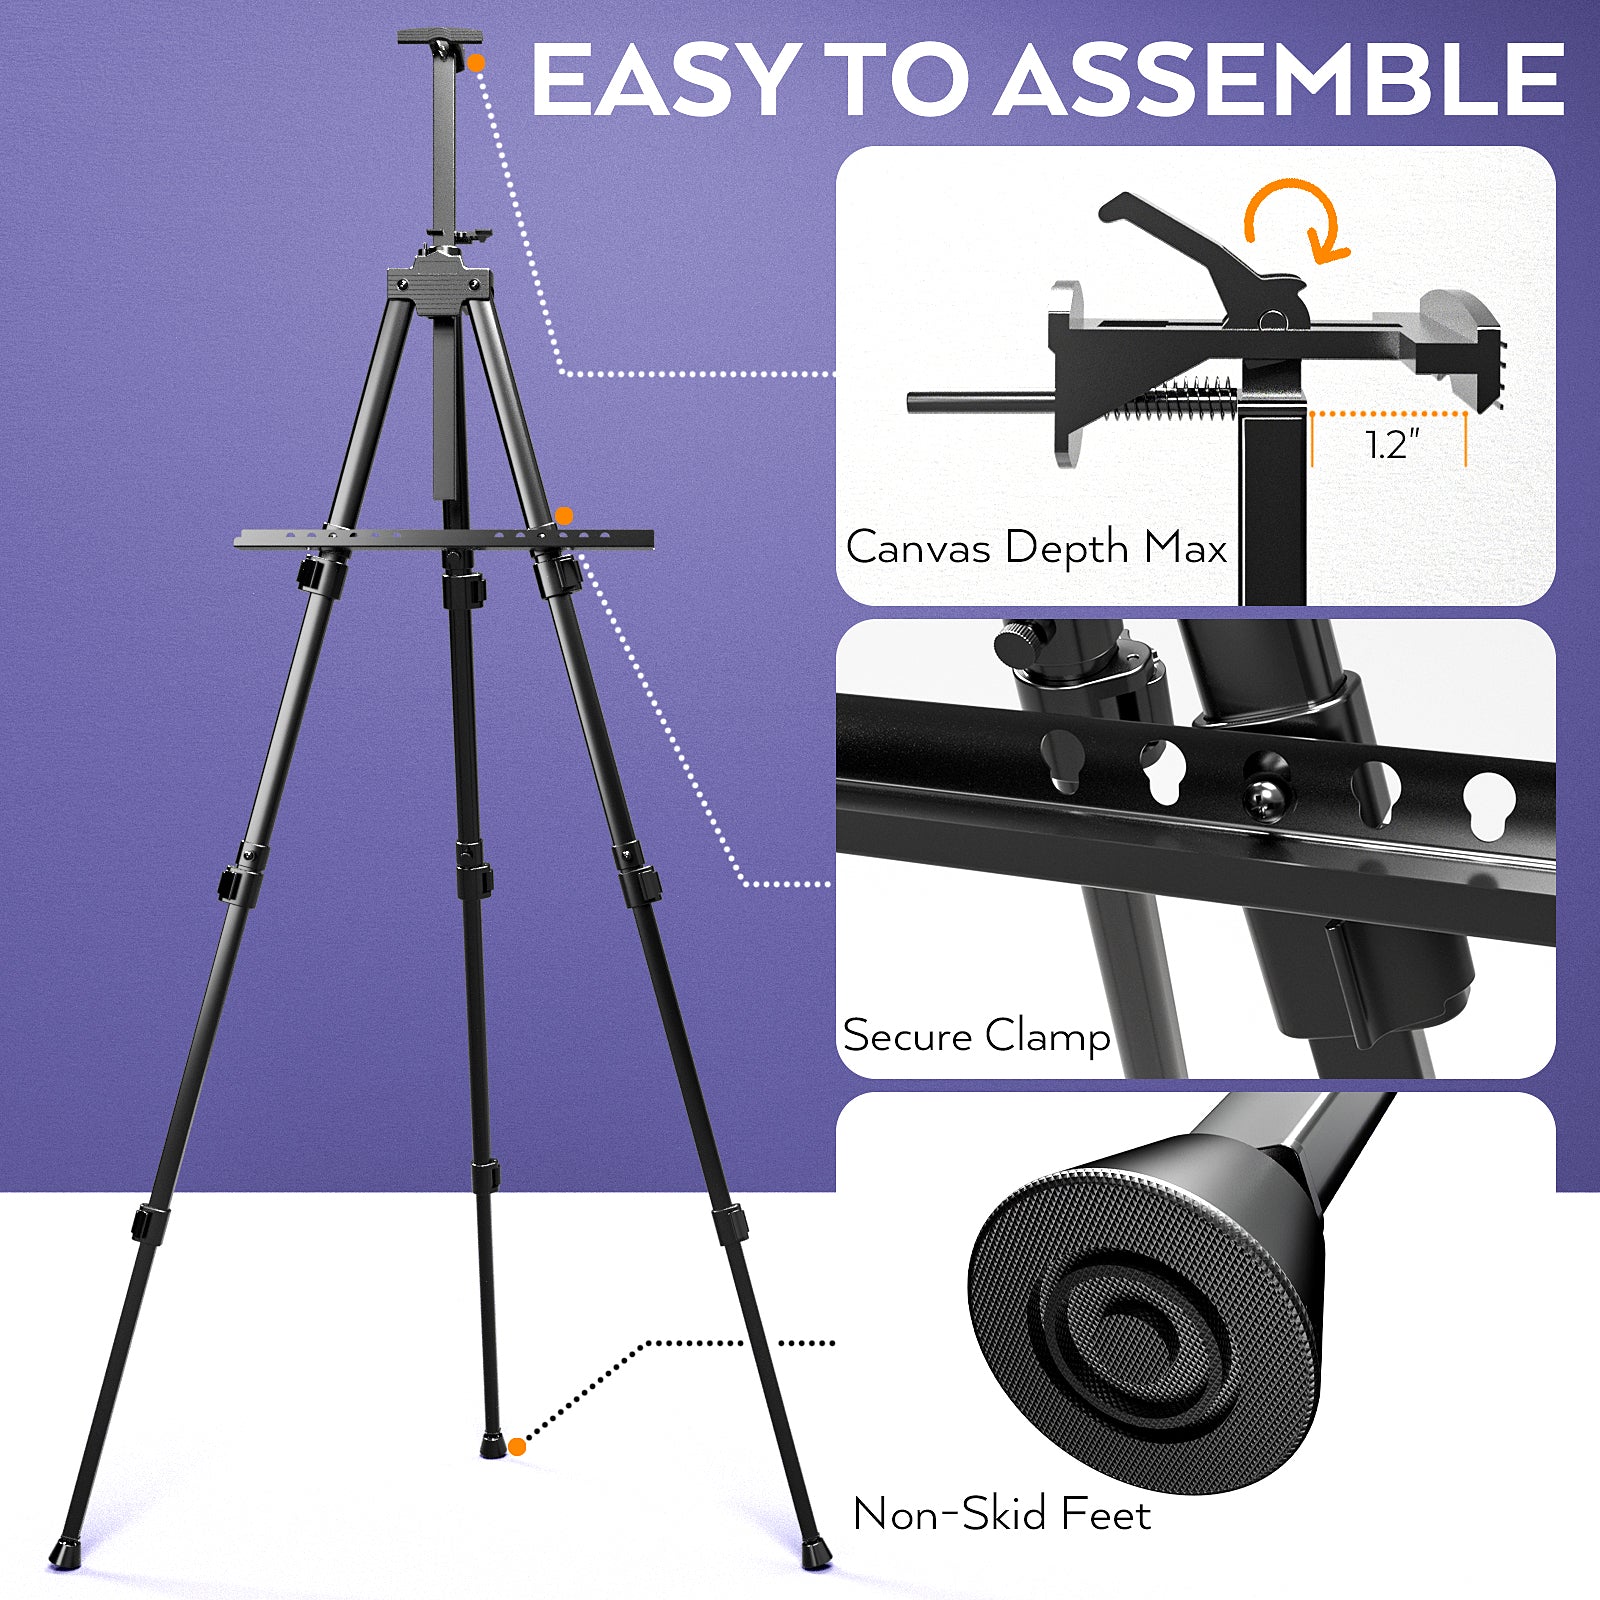  Artist Easel Stand, Nicpro Adjustable Easels for Painting  Canvas Height from17 to 66, Black Art Easel for Table-Top/Floor Display,  Wedding Signs - Holds 25 lbs : Office Products